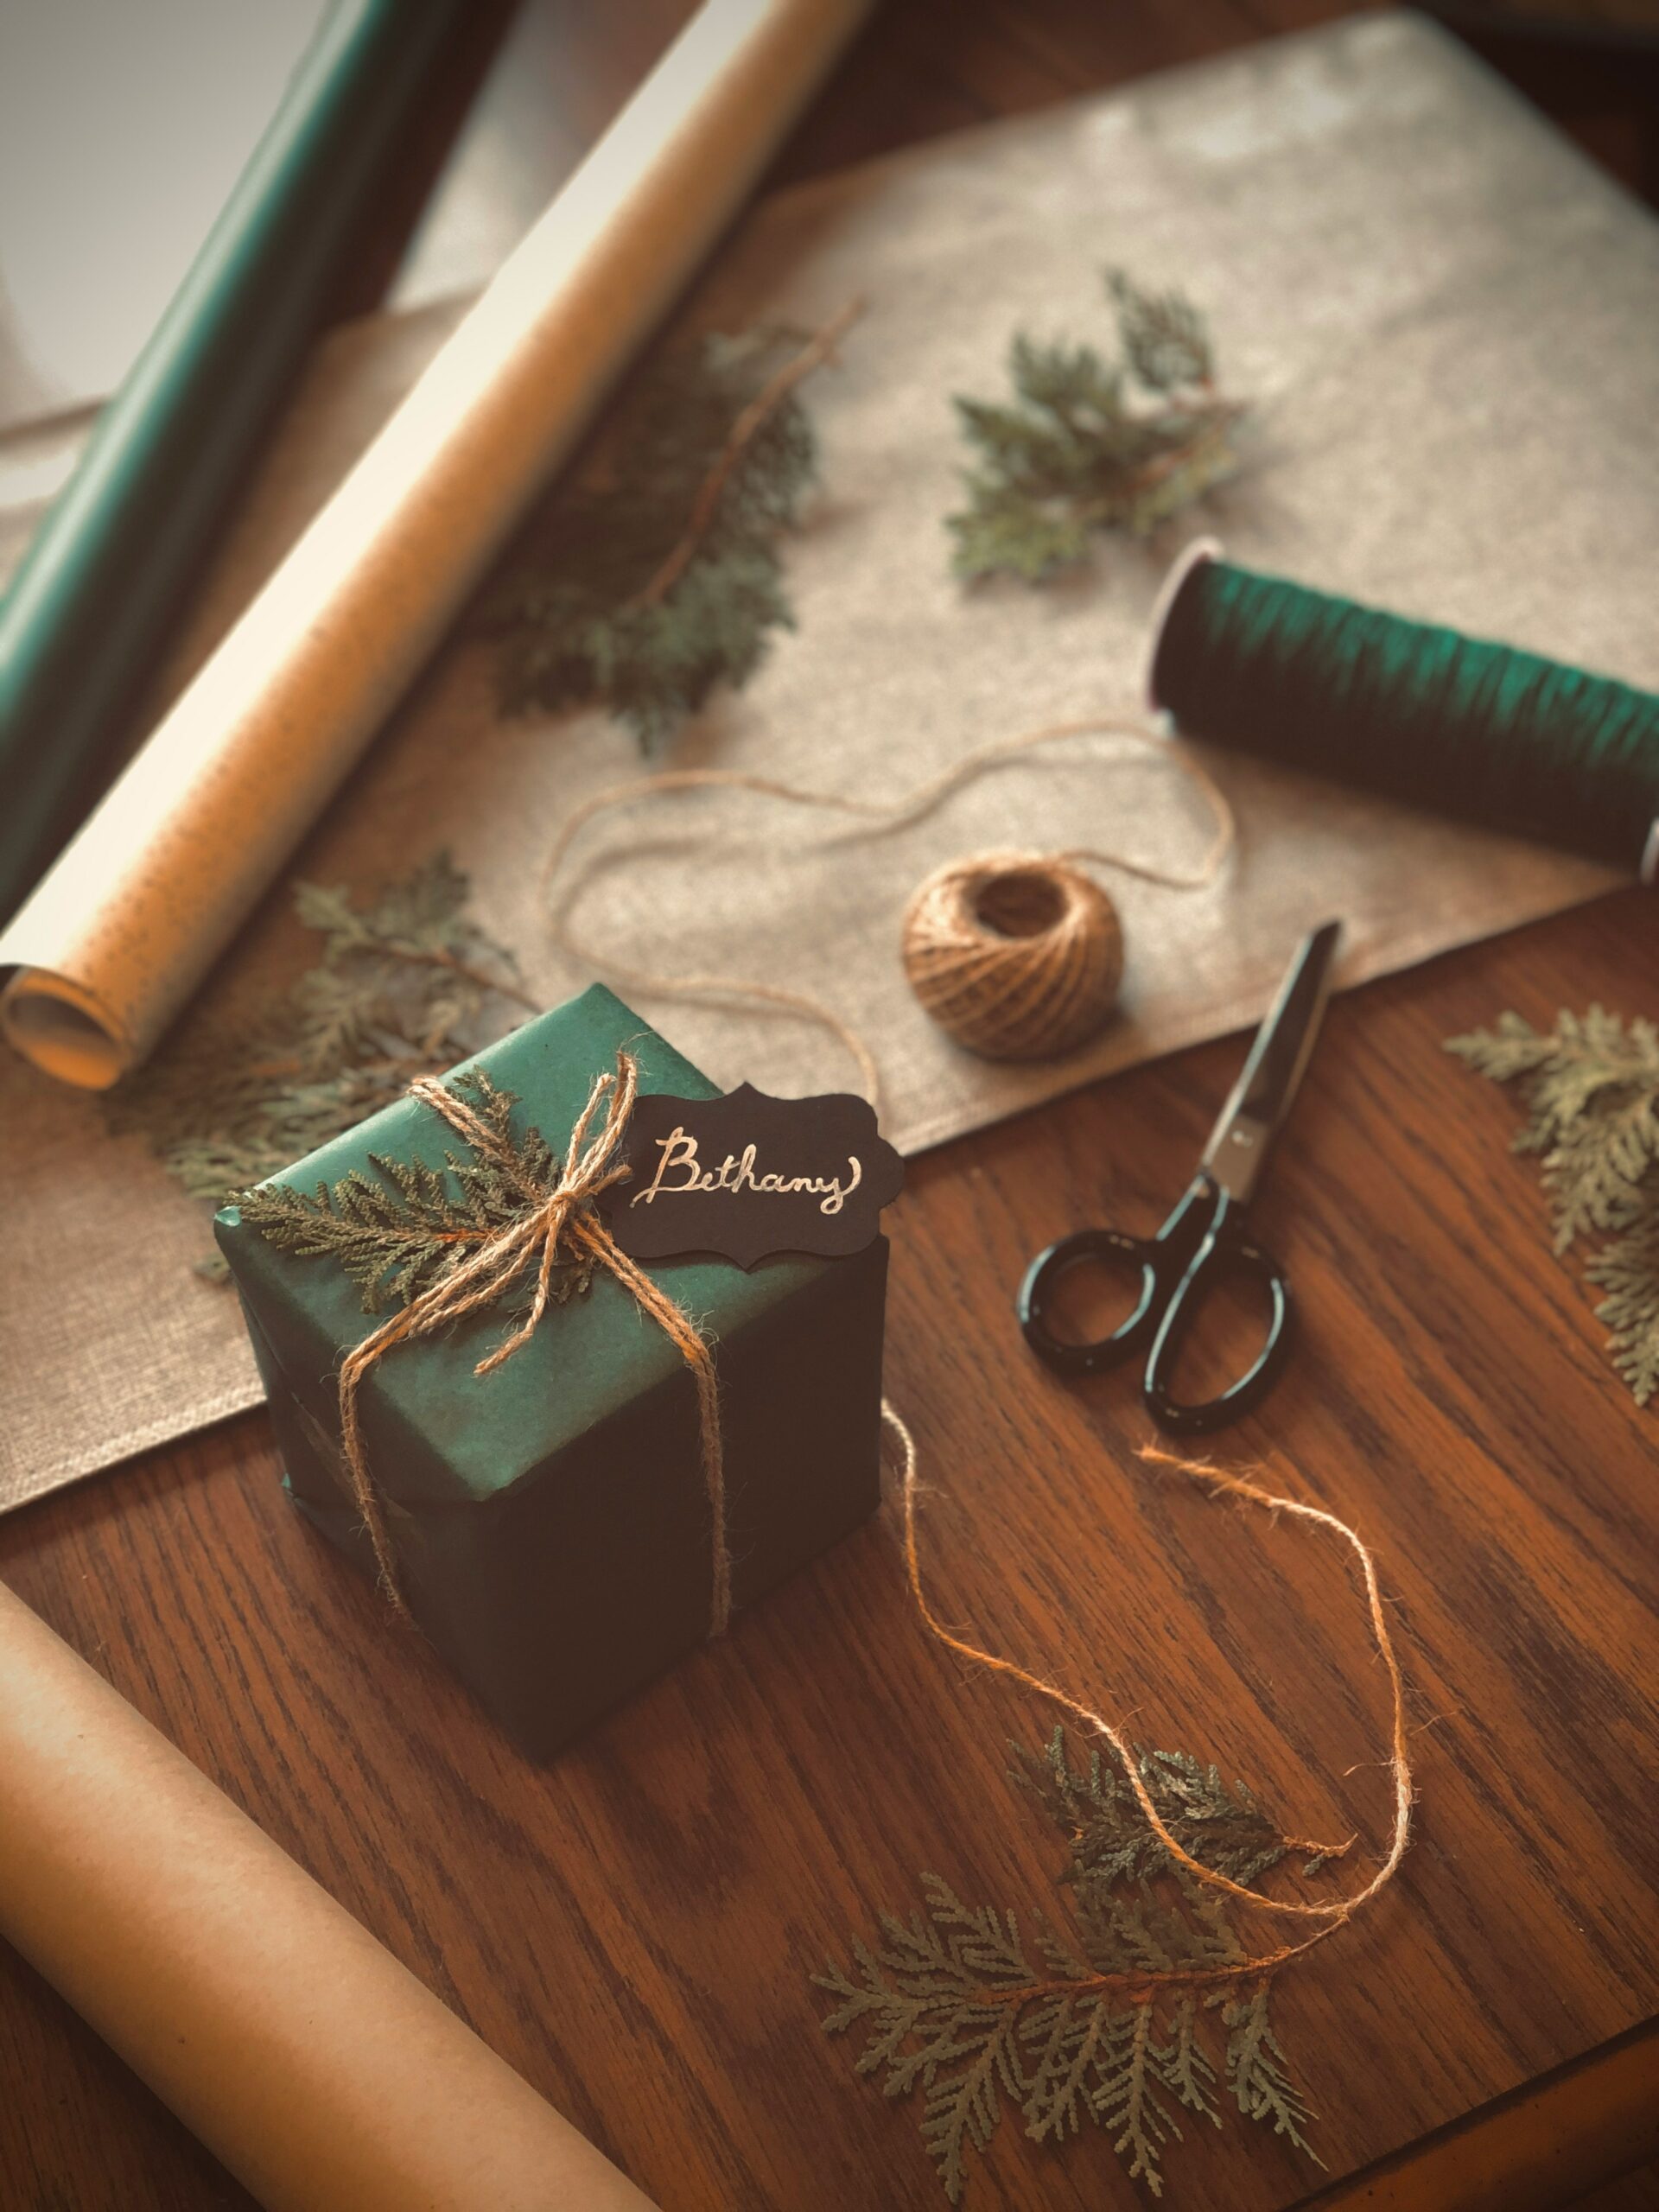 A gift box wrapped in green paper with a twine bow tie.